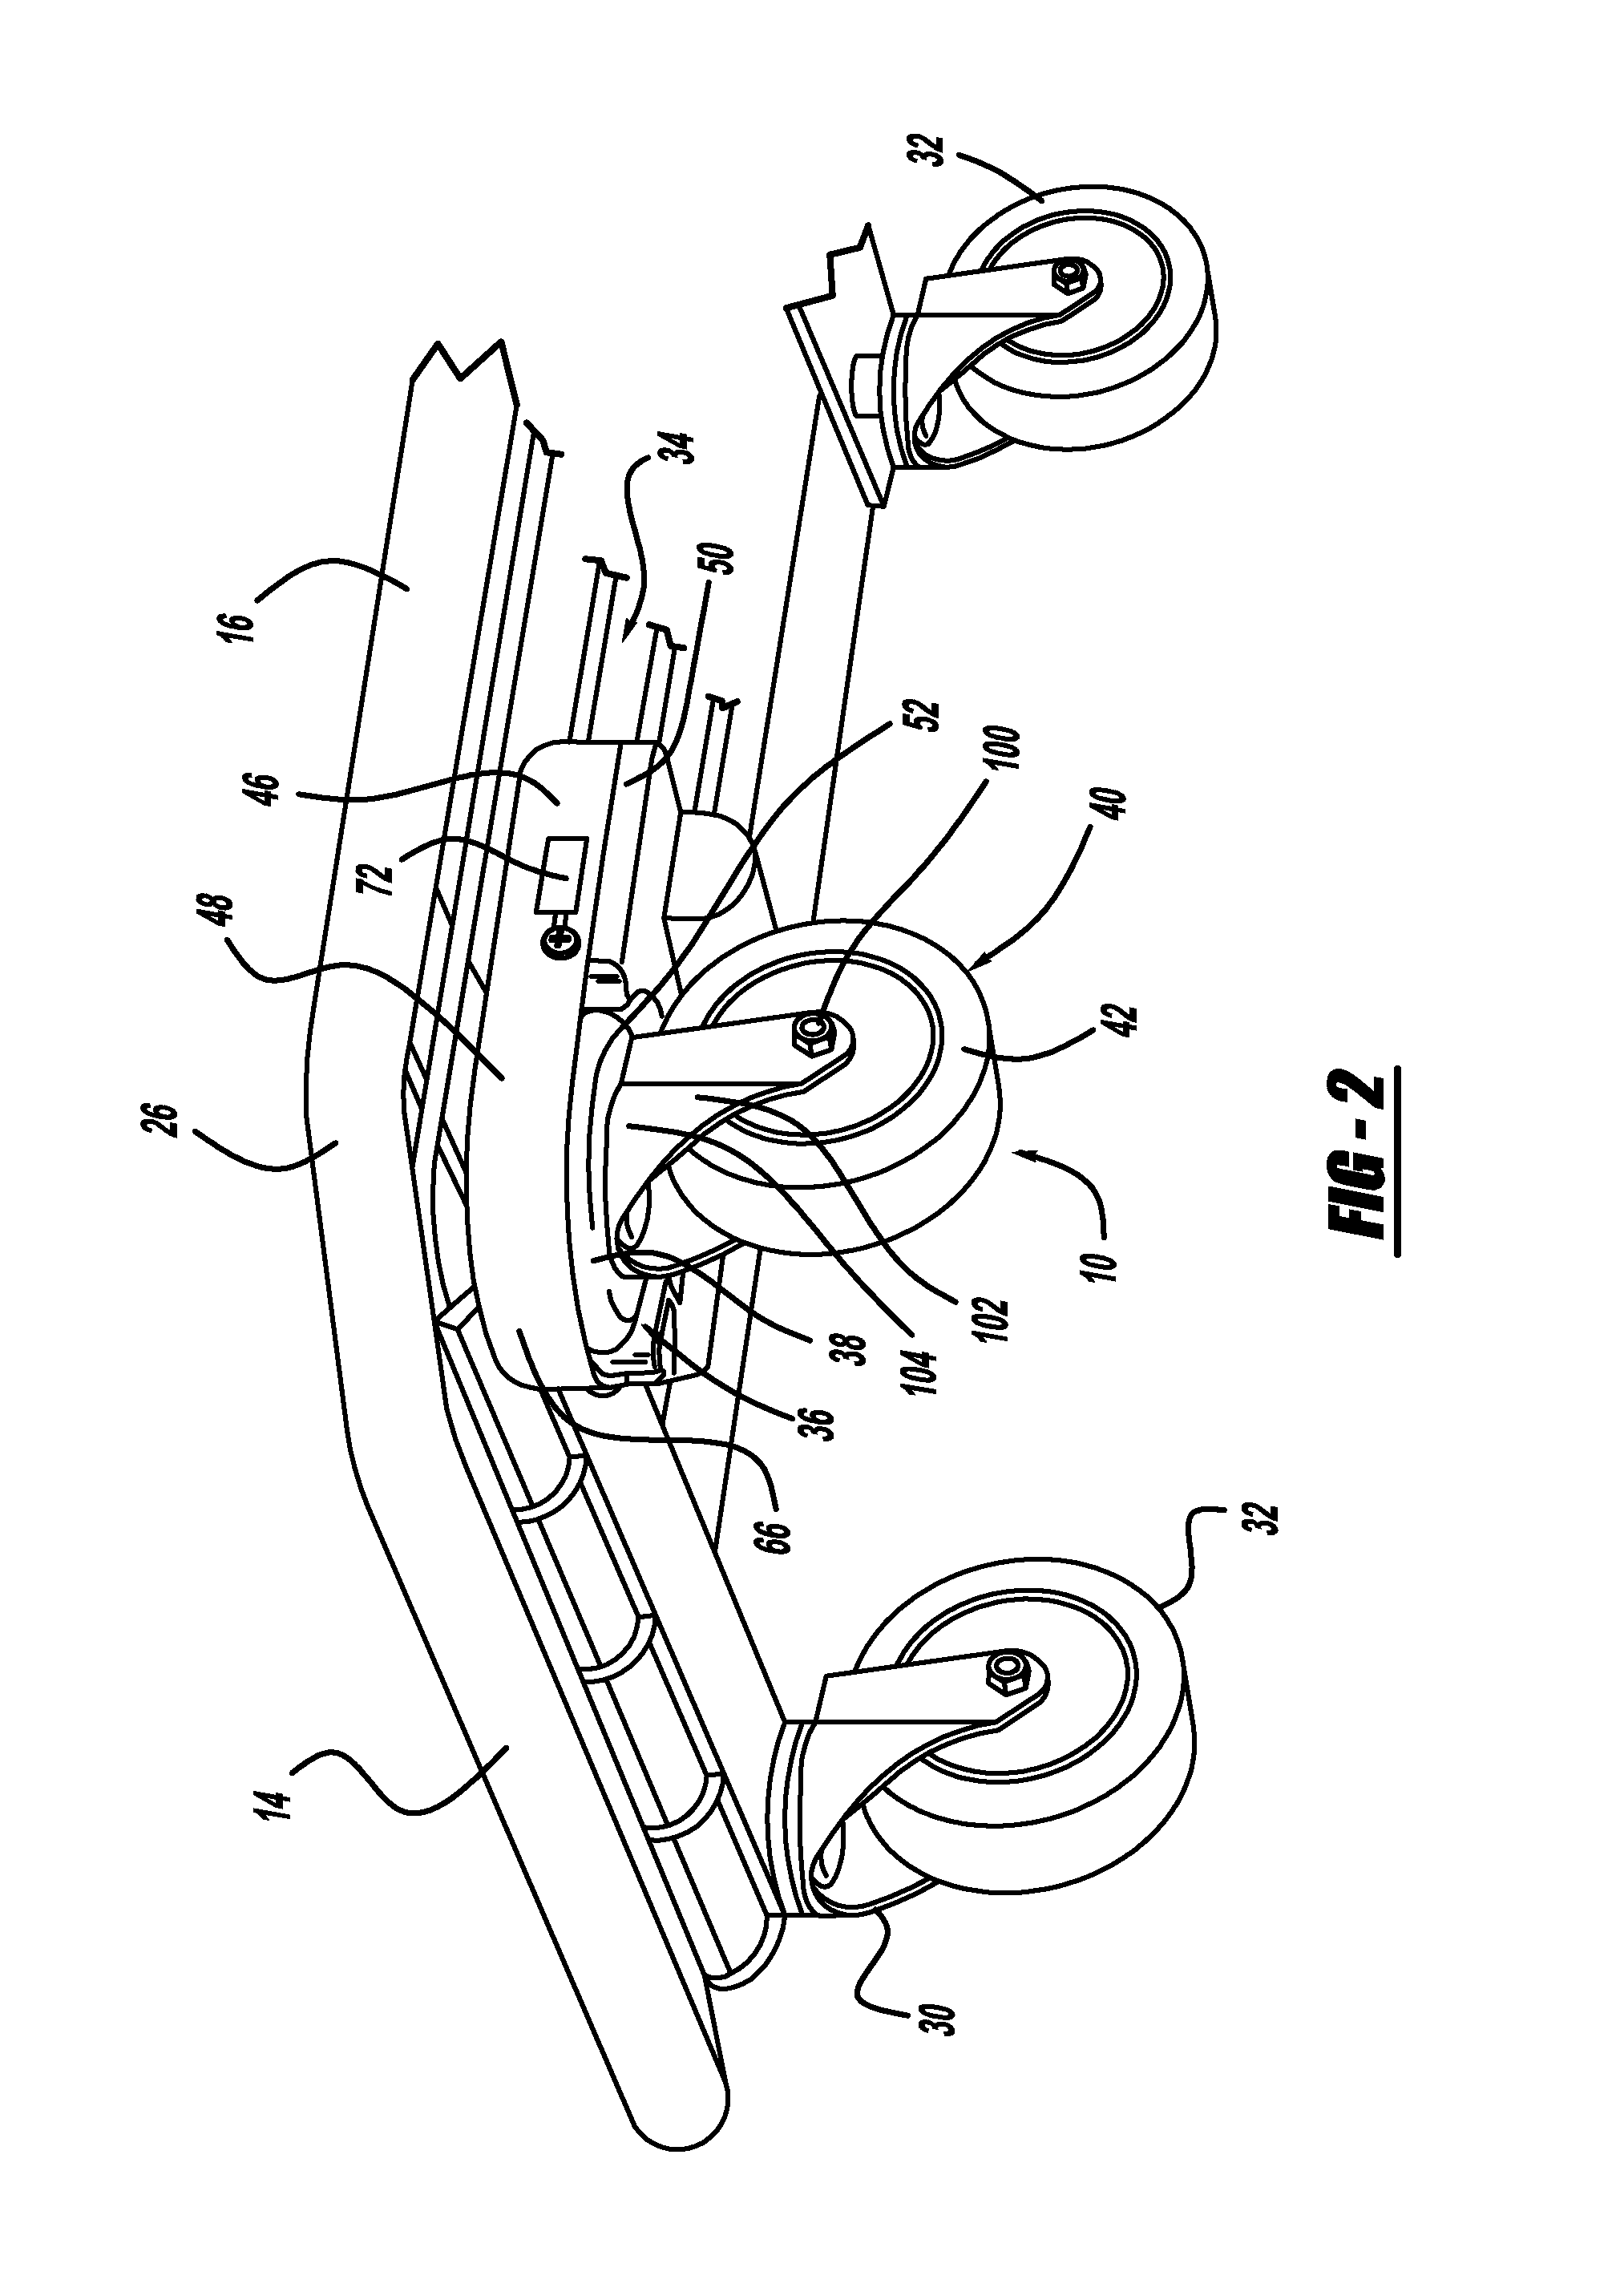 Security device and method for inhibiting the unauthorized removal of a transport vehicle from a designated use area